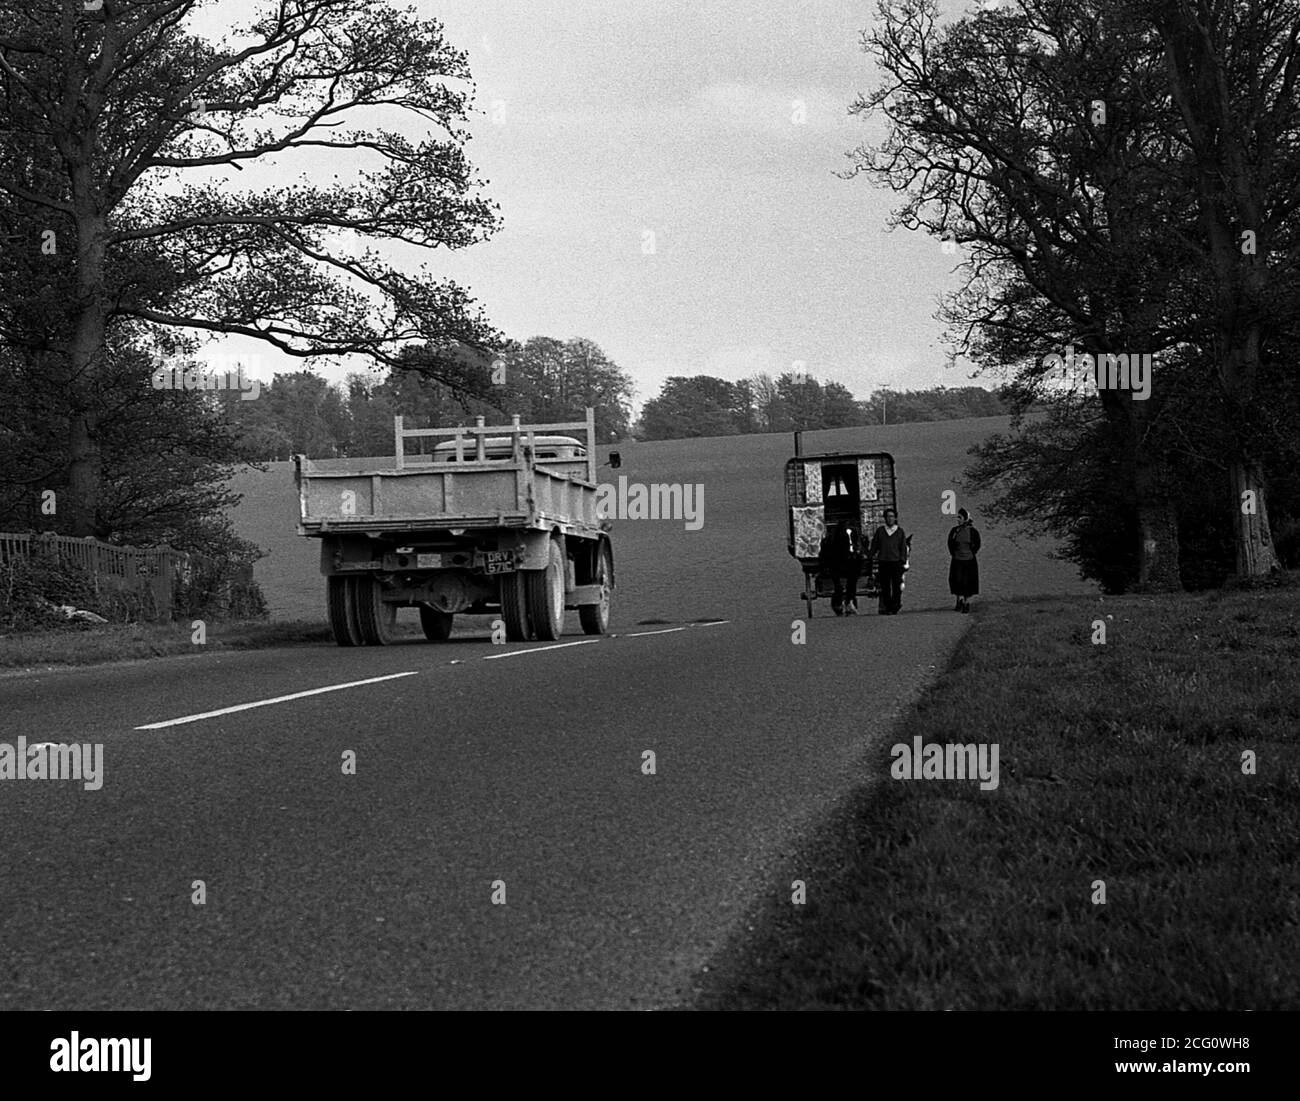 AJAXNETPHOTO. 1967. BASINGSTOKE, ENGLAND. - ON THE ROAD - A HORSE DRAWN ROMANY CARAVAN AND ITS OWNERS ON THE ROAD TO BASINGSTOKE.PHOTO:JONATHAN EASTLAND/AJAX REF:M356797 20A 77 Stock Photo